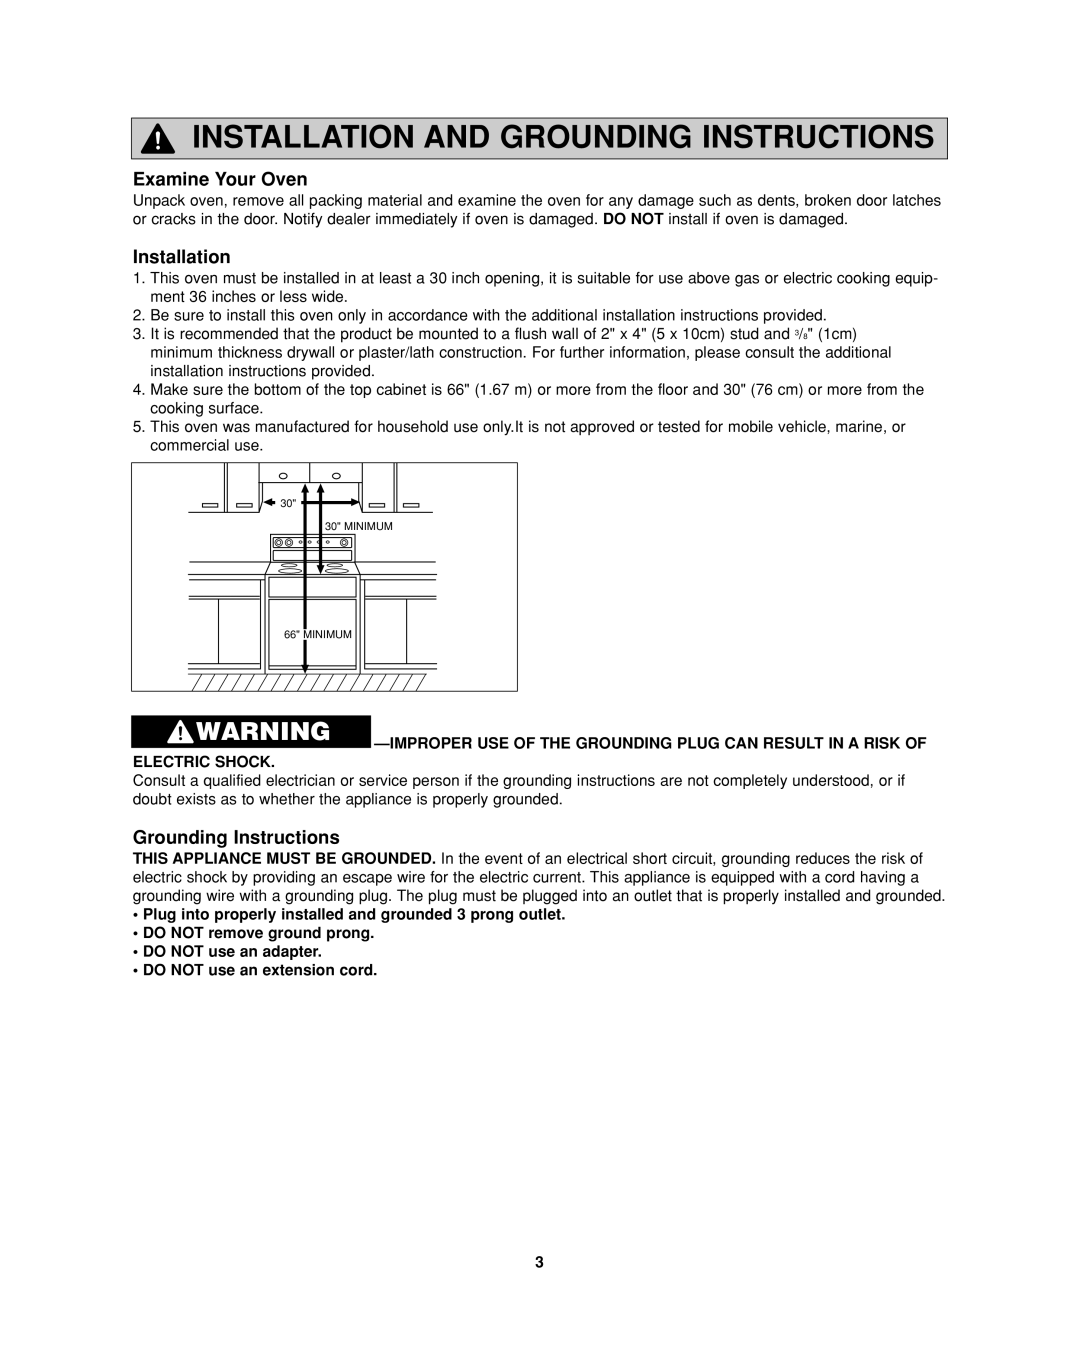 Panasonic NN-SD277 important safety instructions Installation And Grounding Instructions, Examine Your Oven 